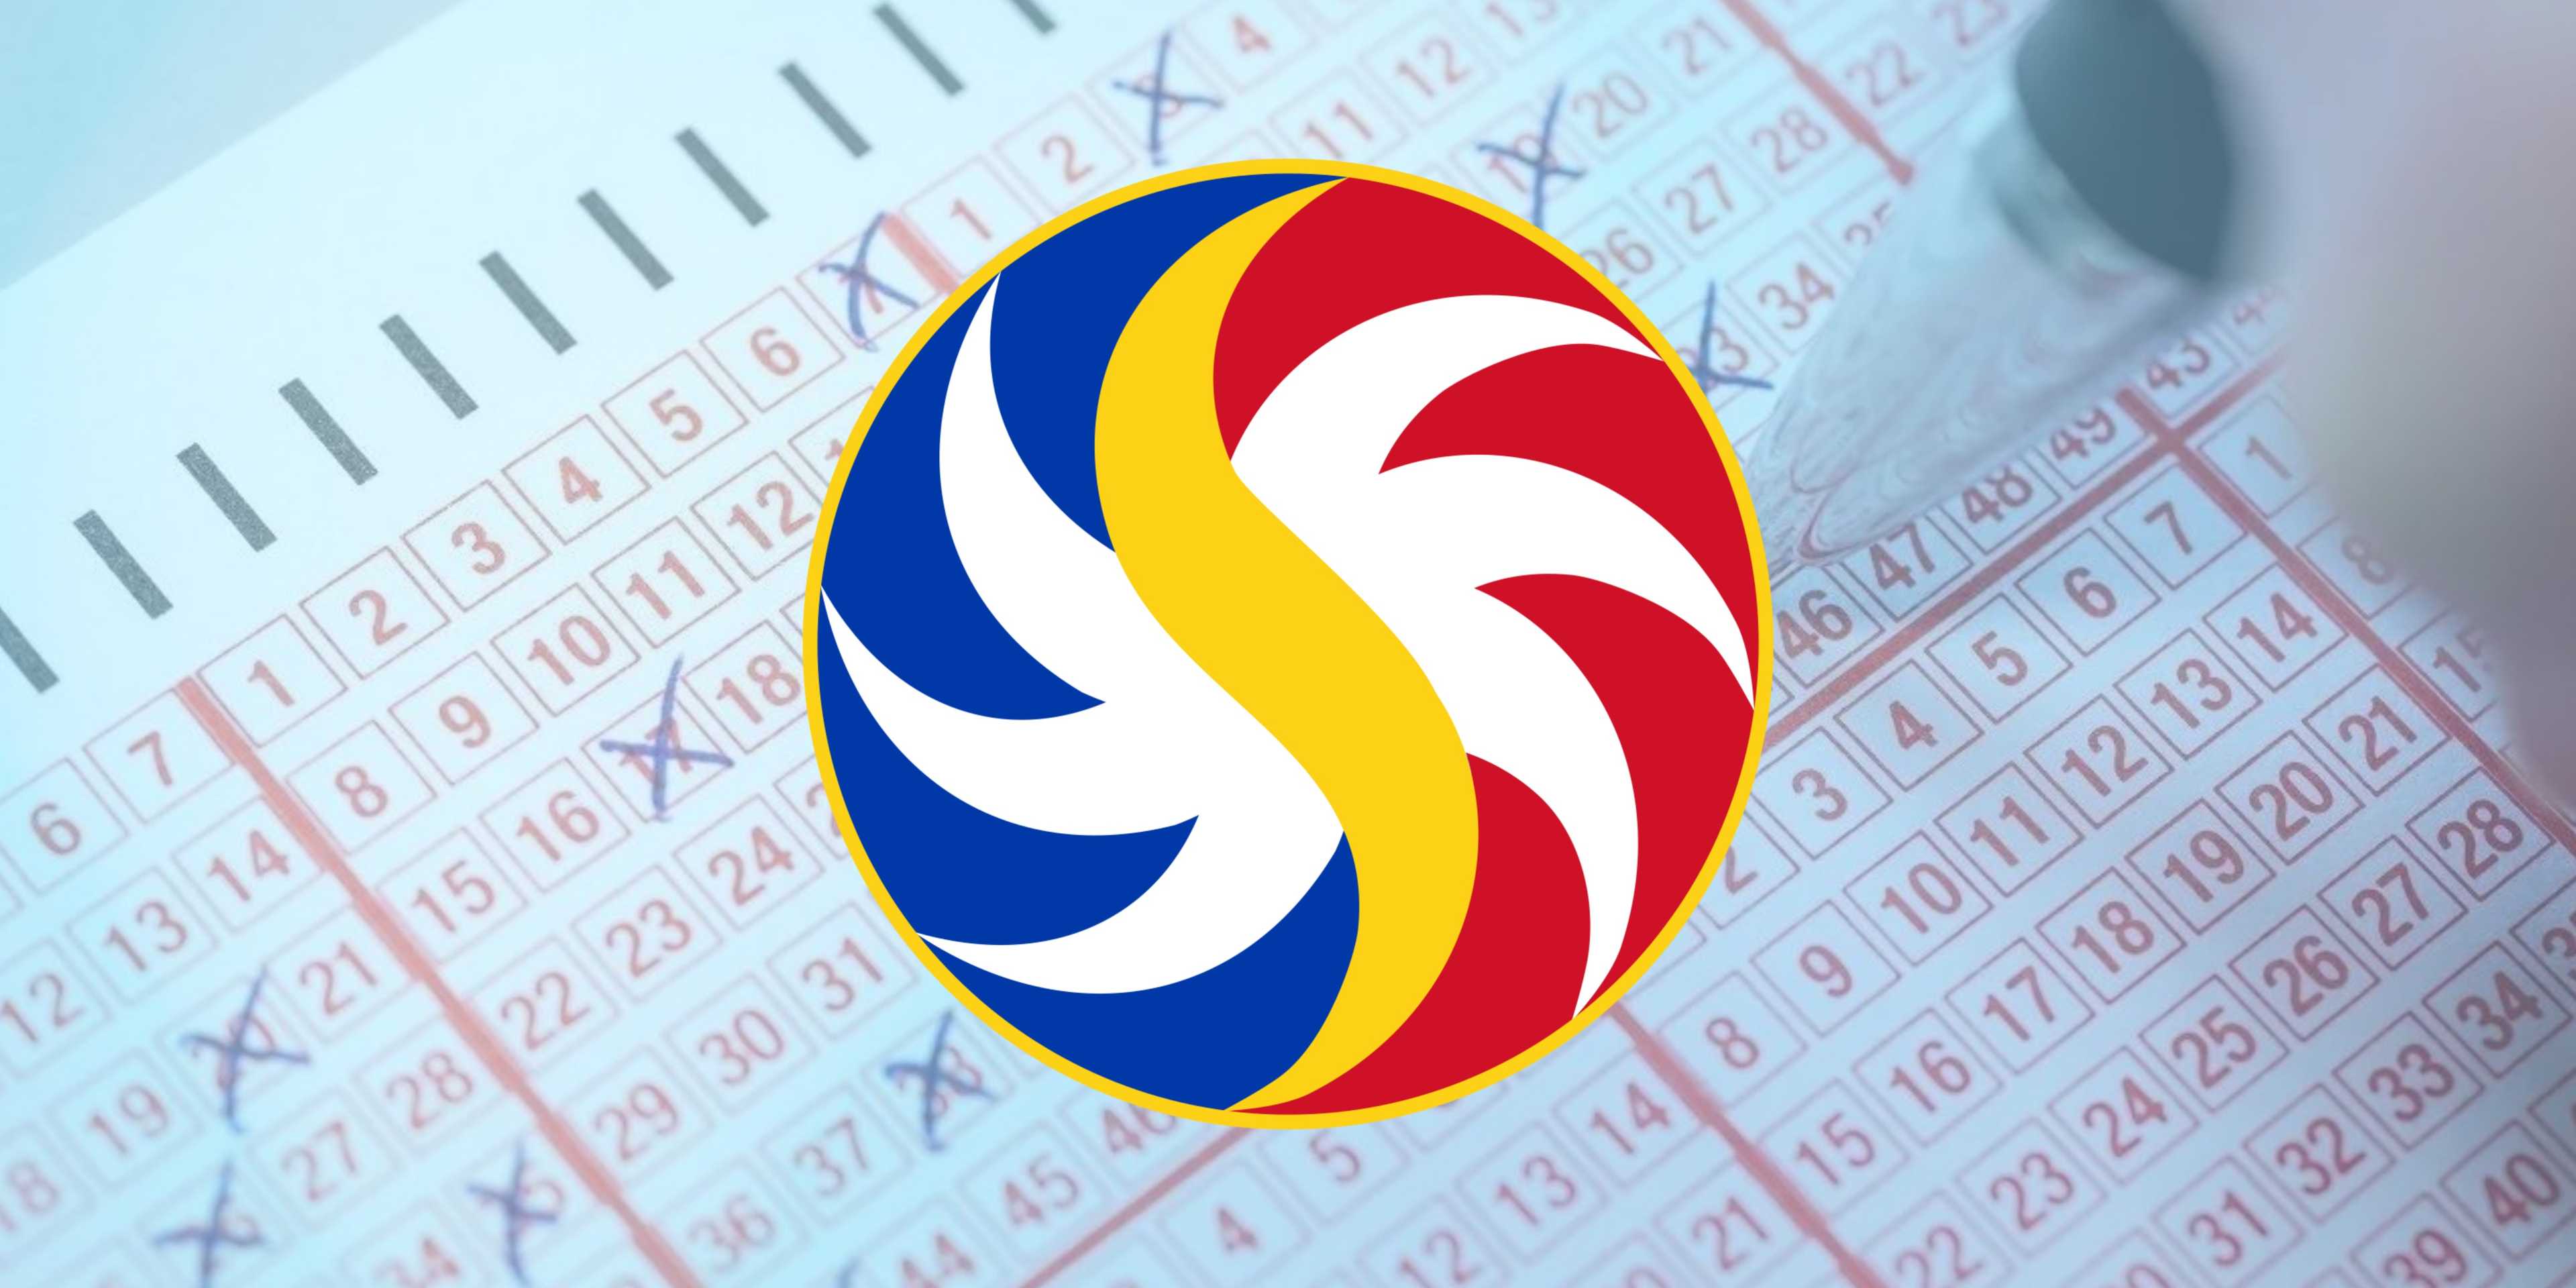 PCSO Lotto Draw Results on Saturday, March 16